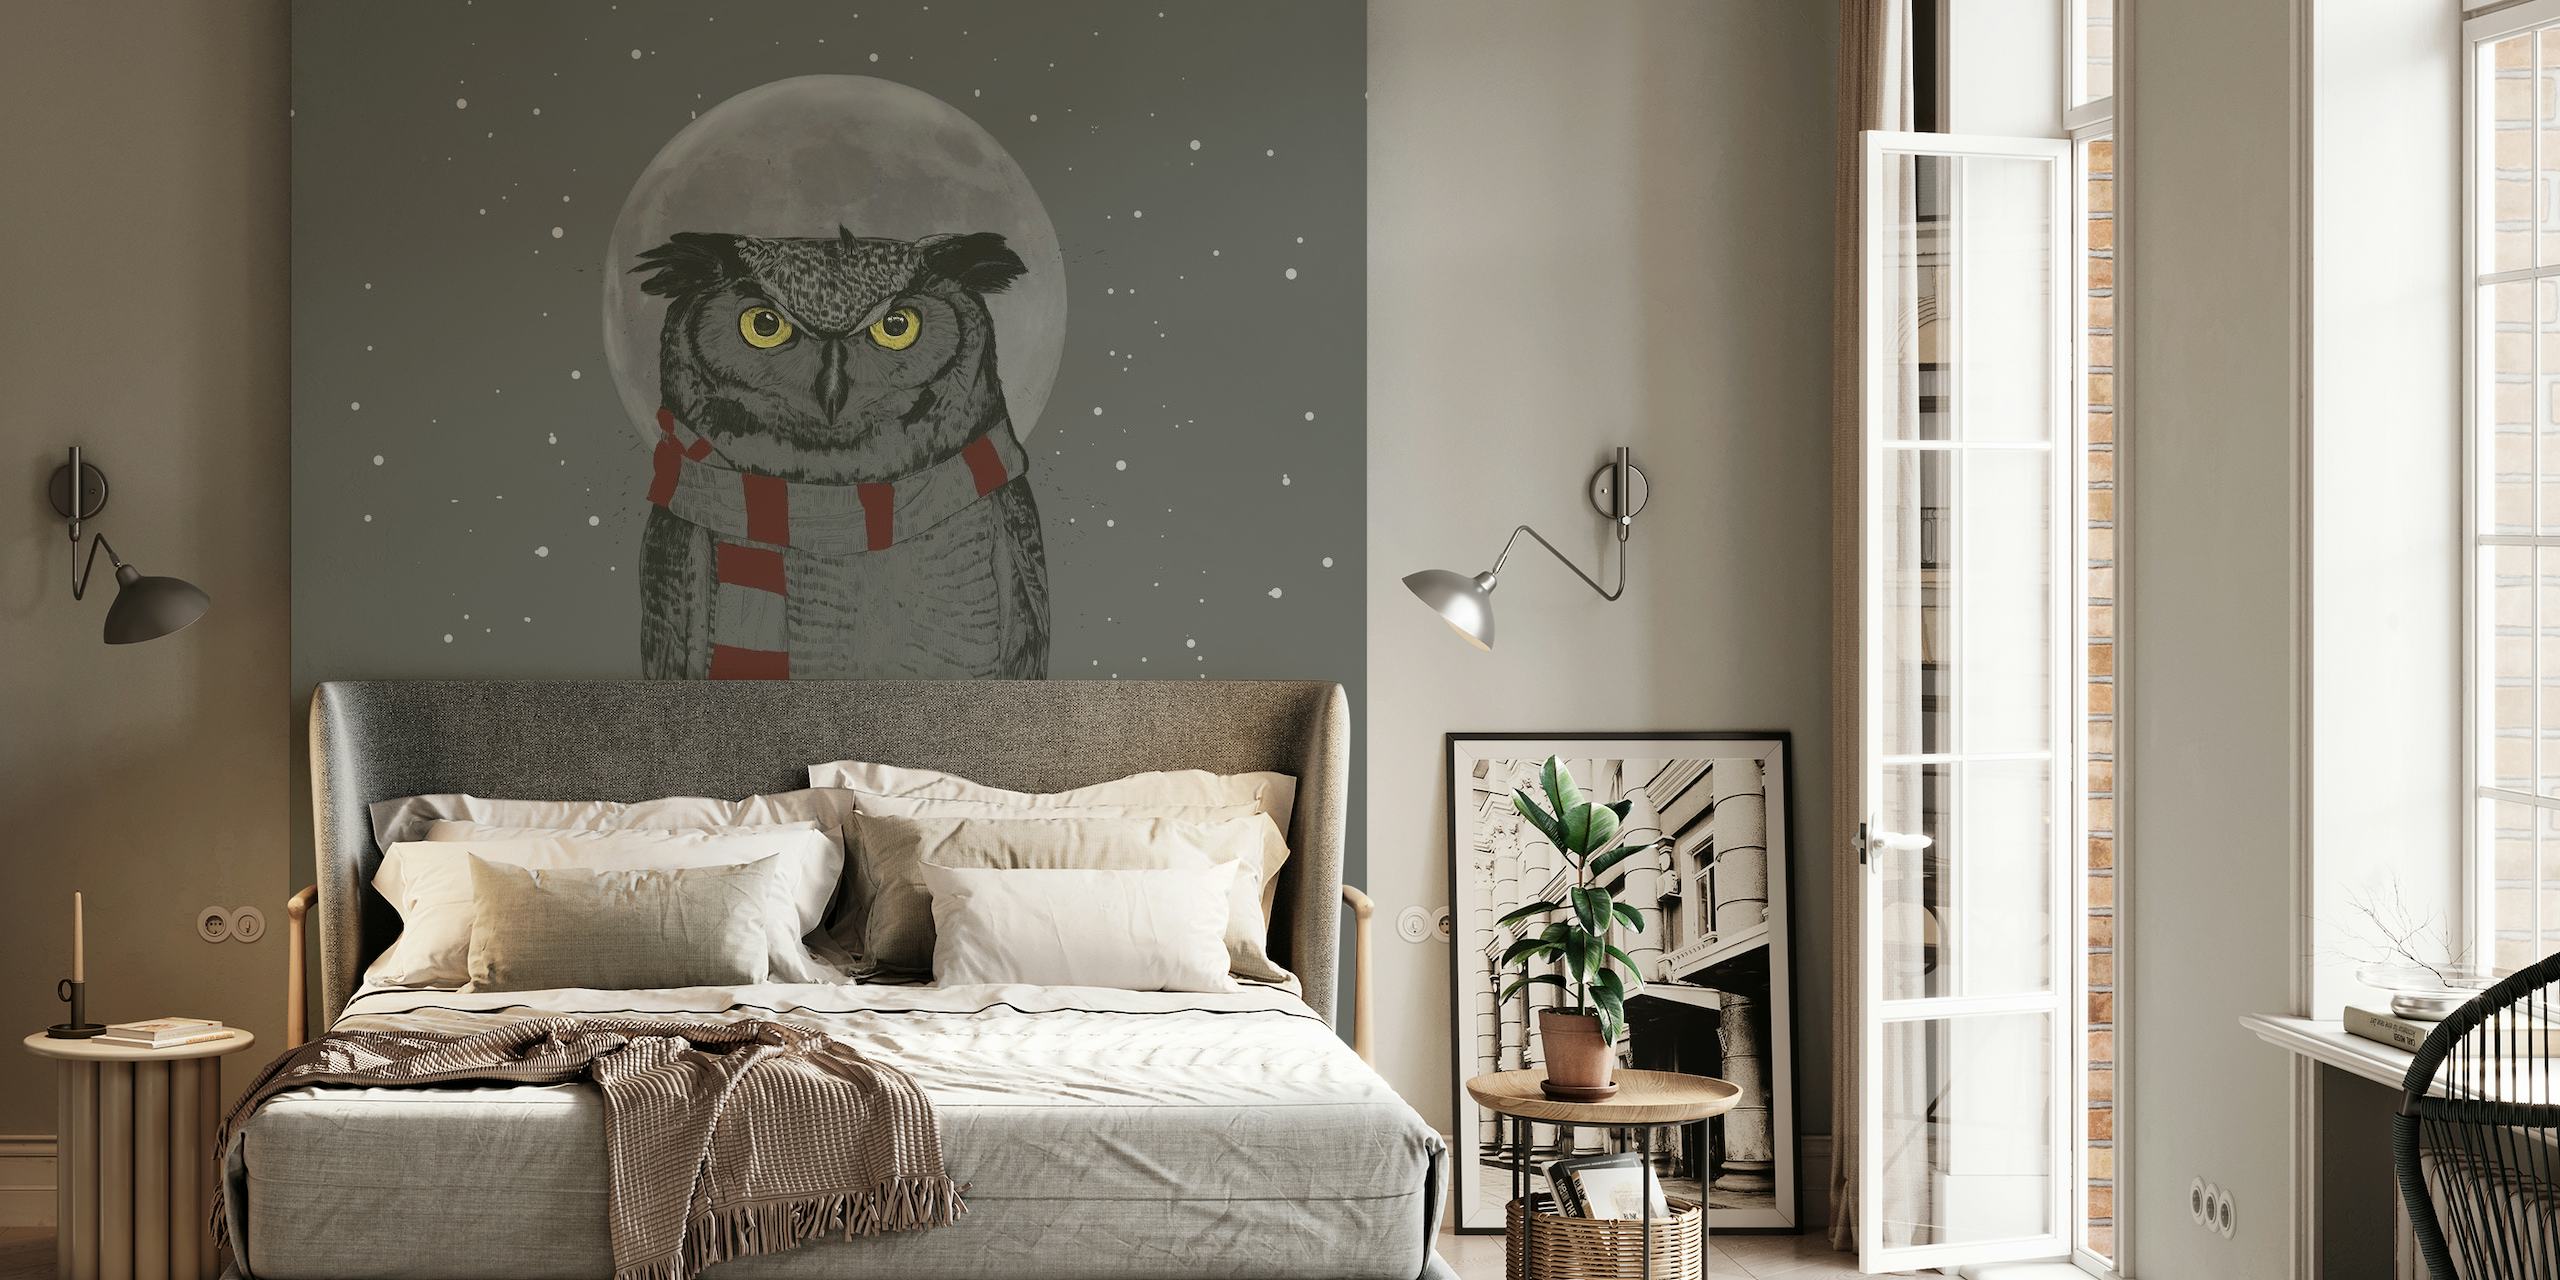 Stylized gray owl with a red scarf sitting on a branch with a full moon and snowflakes in the background